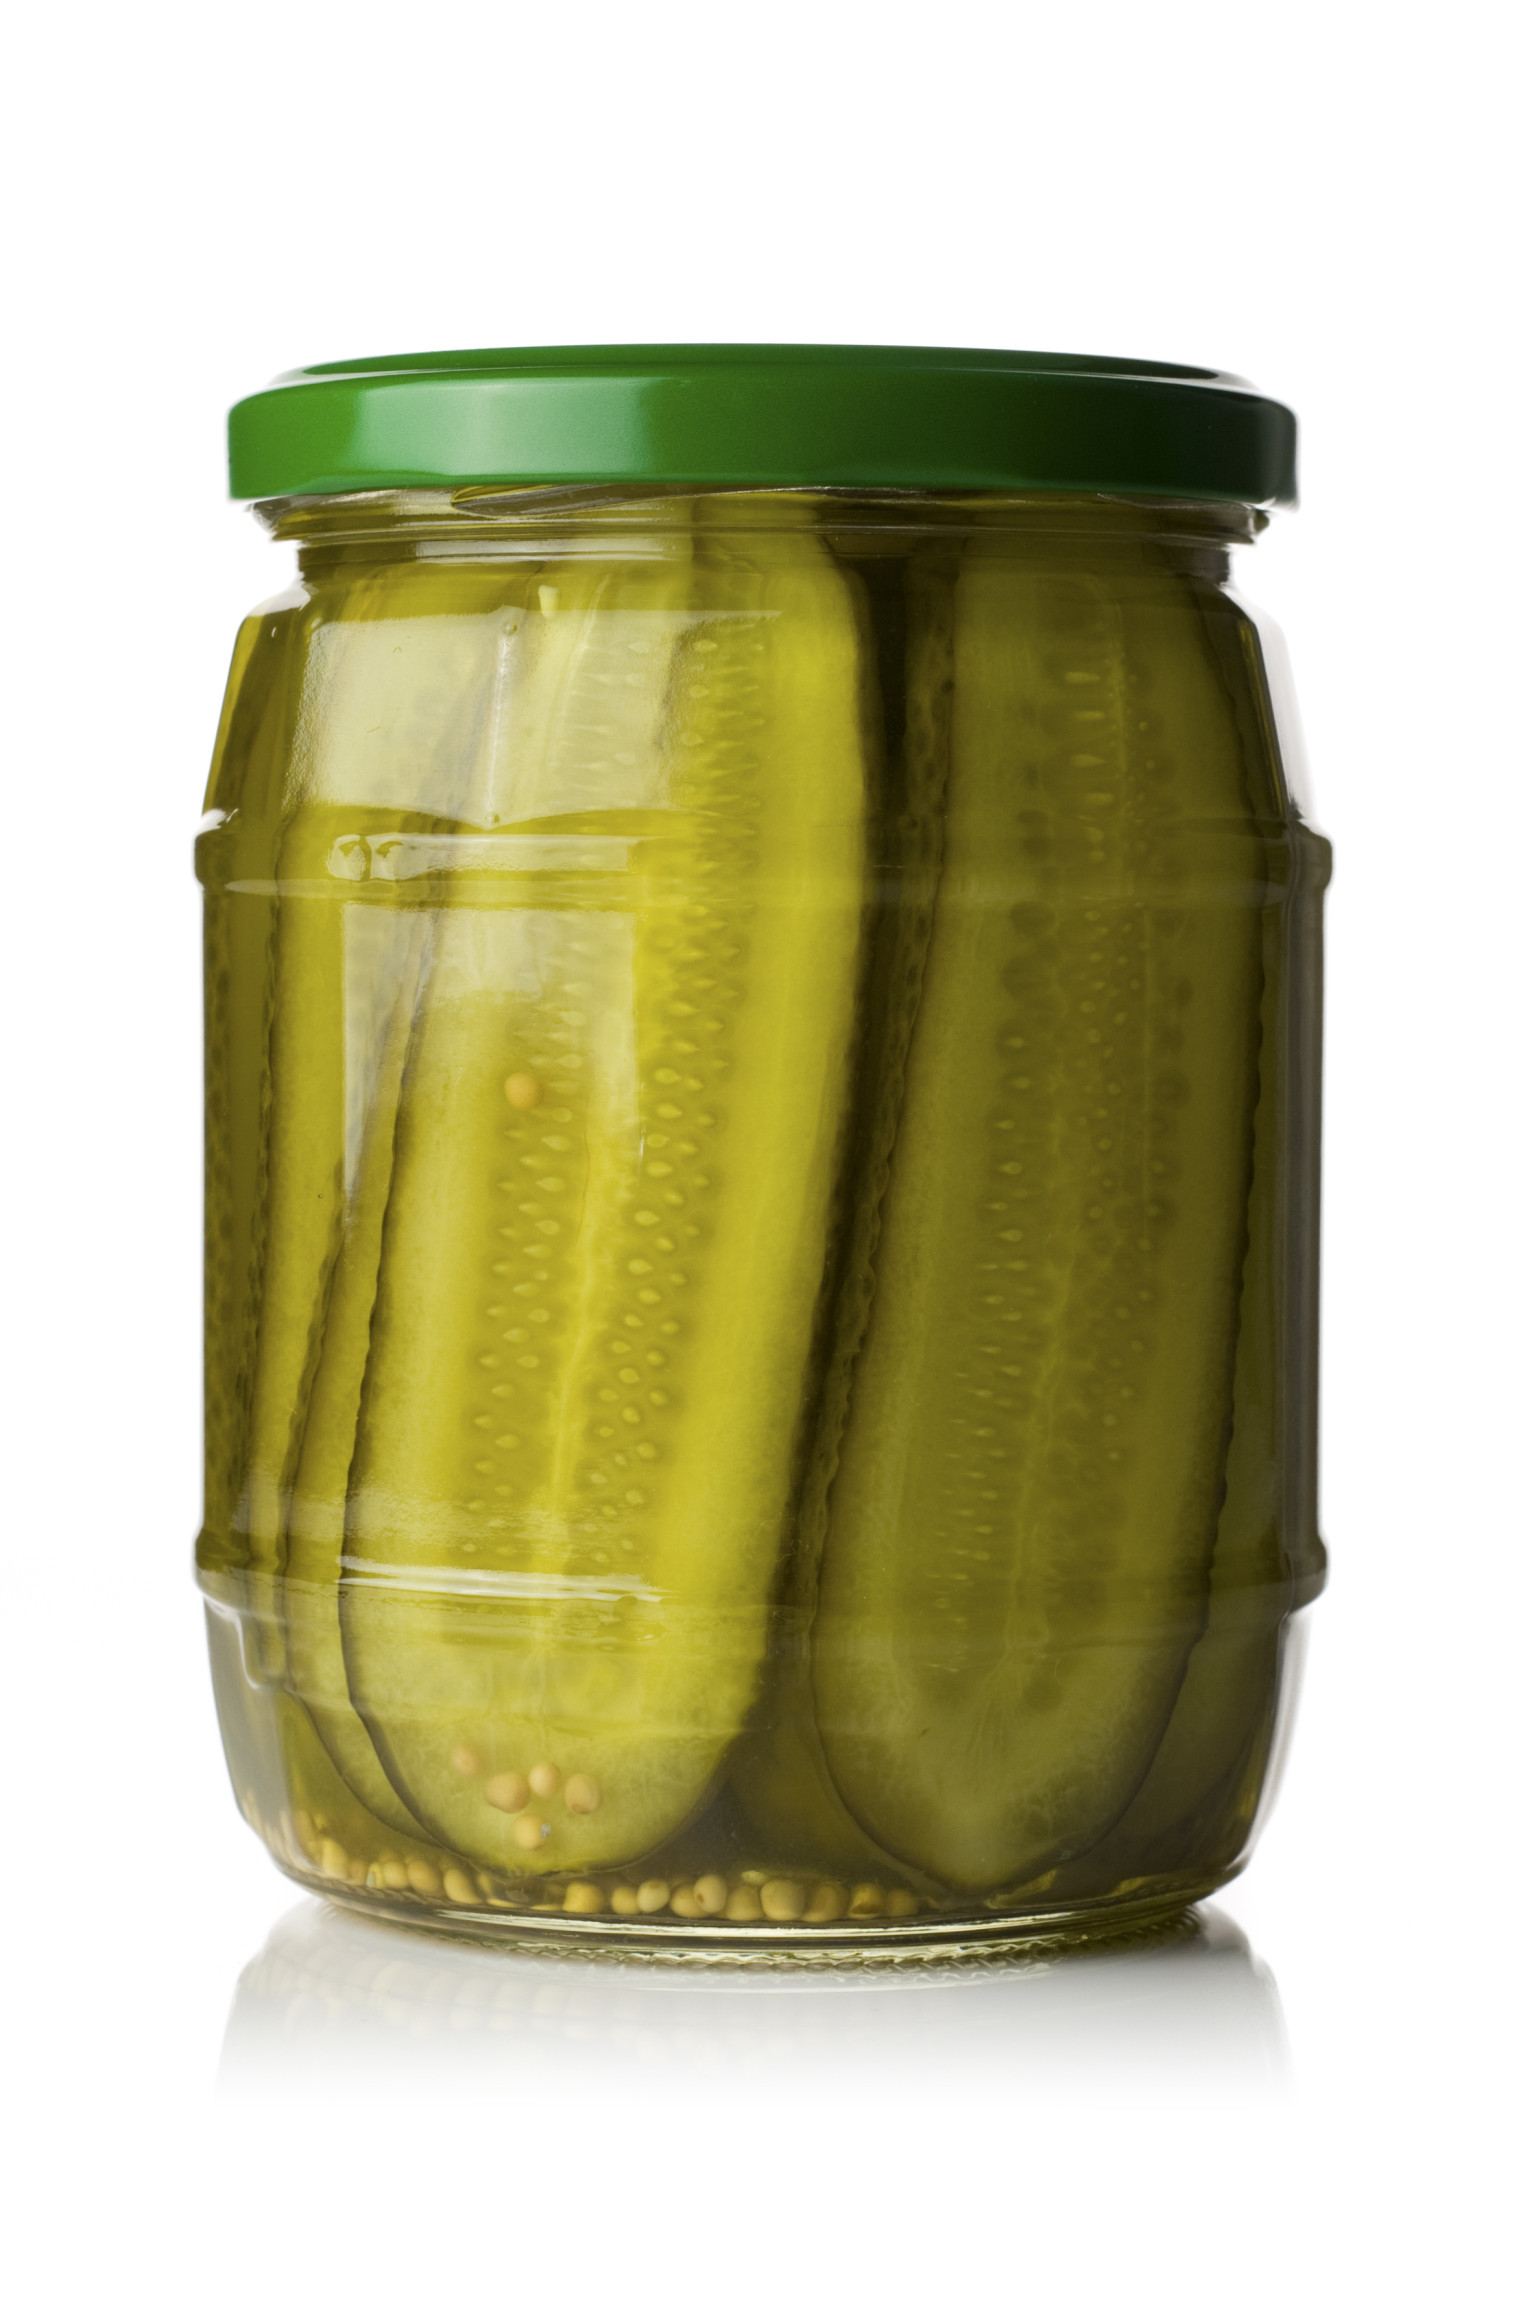 Picklebacks How One Editor Fell in Love With Pickle Juice